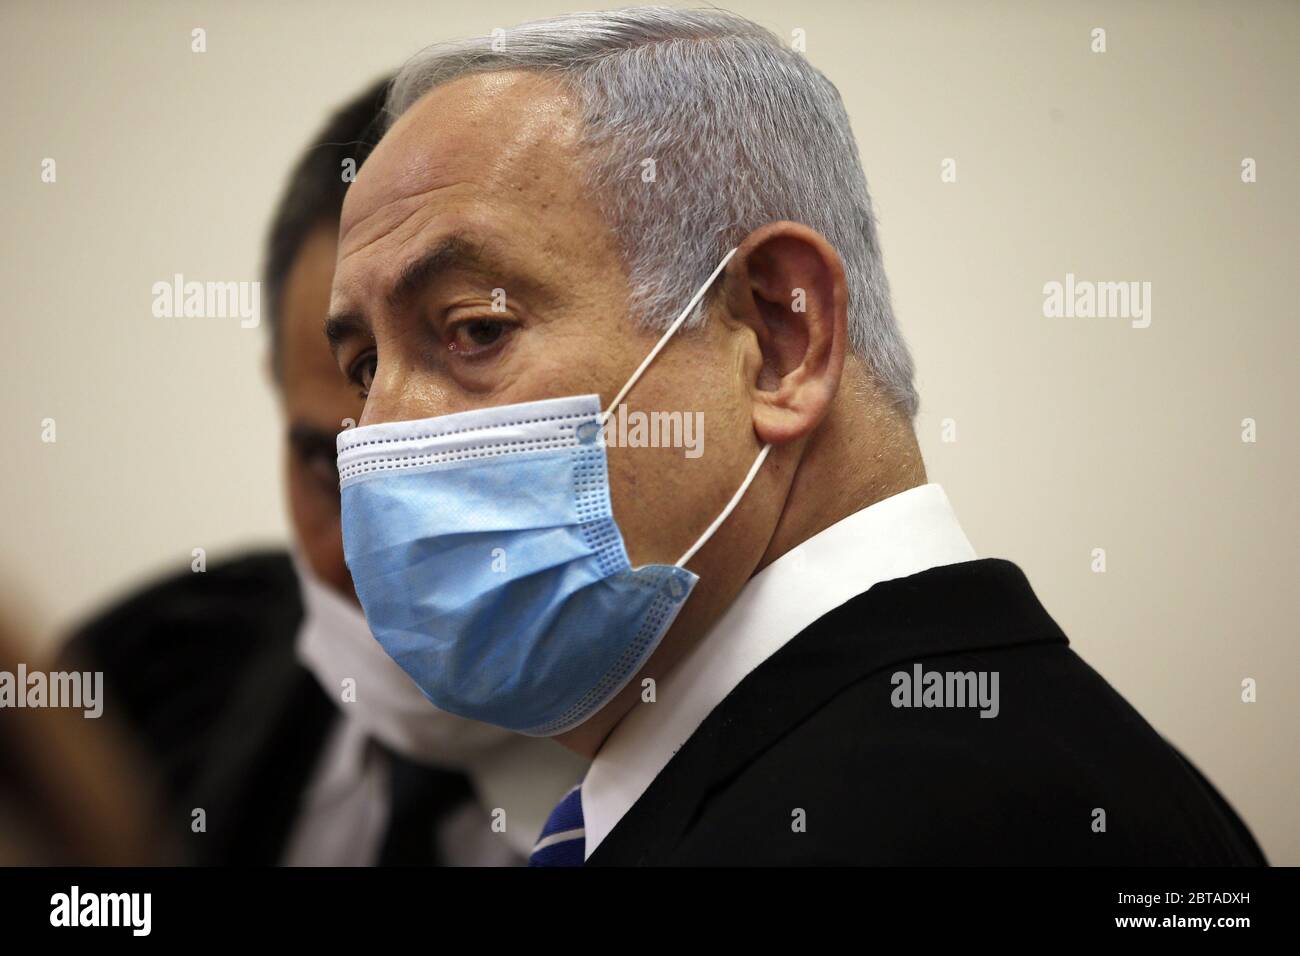 Jerusalem, Israel. 24th May, 2020. Israeli Prime Minister Benjamin Netanyahu, wearing a face mask, looks on while standing inside the court room as his corruption trial opens at the Jerusalem District Court on Sunday, May 24, 2020. Netanyahu attacked the Israeli justice system as he became the first sitting prime minister to go on trial. Pool Photo by Ronen Zvulun/UPI Credit: UPI/Alamy Live News Stock Photo